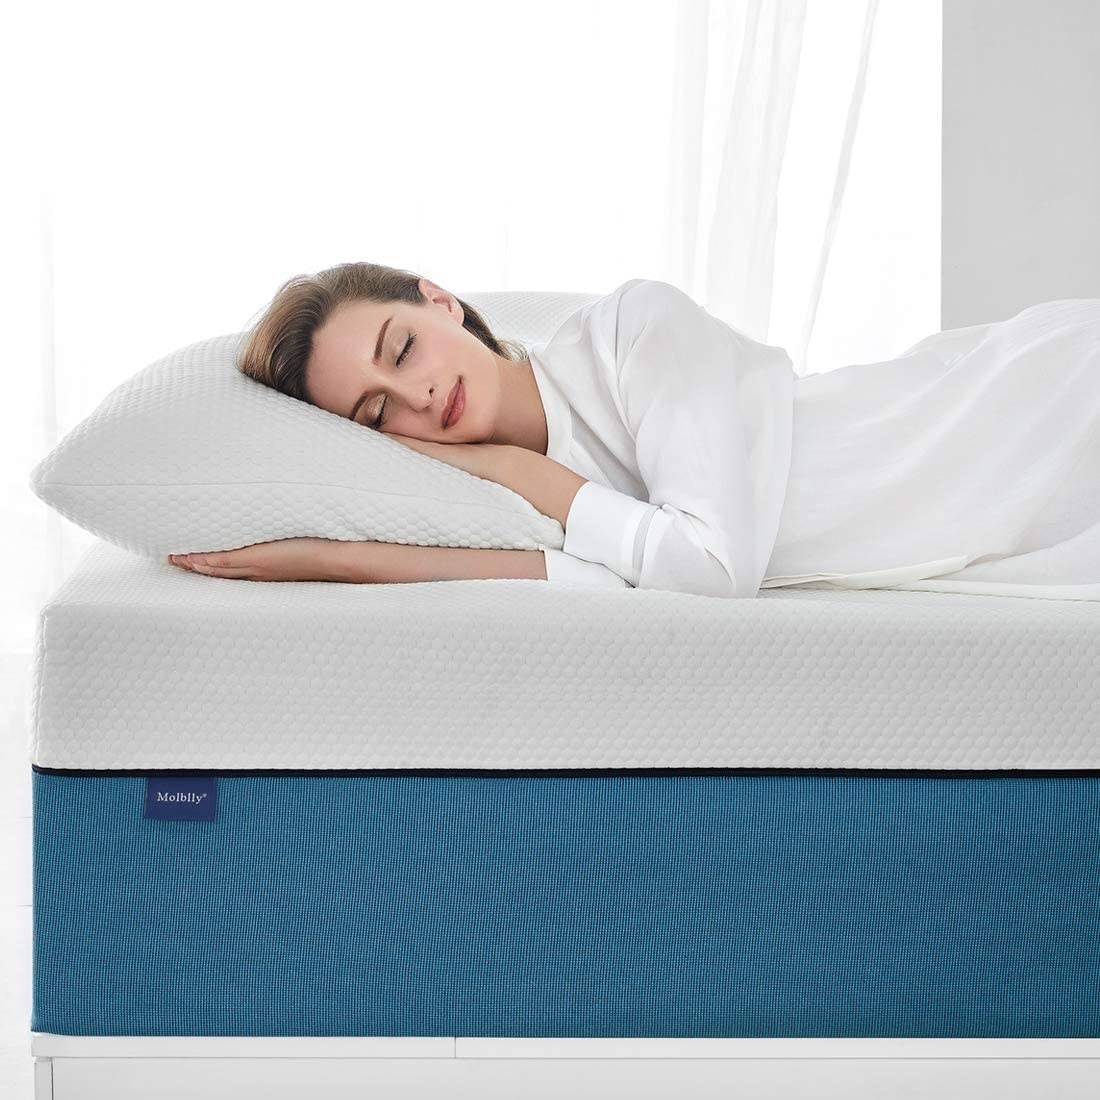 a person laying on the mattress